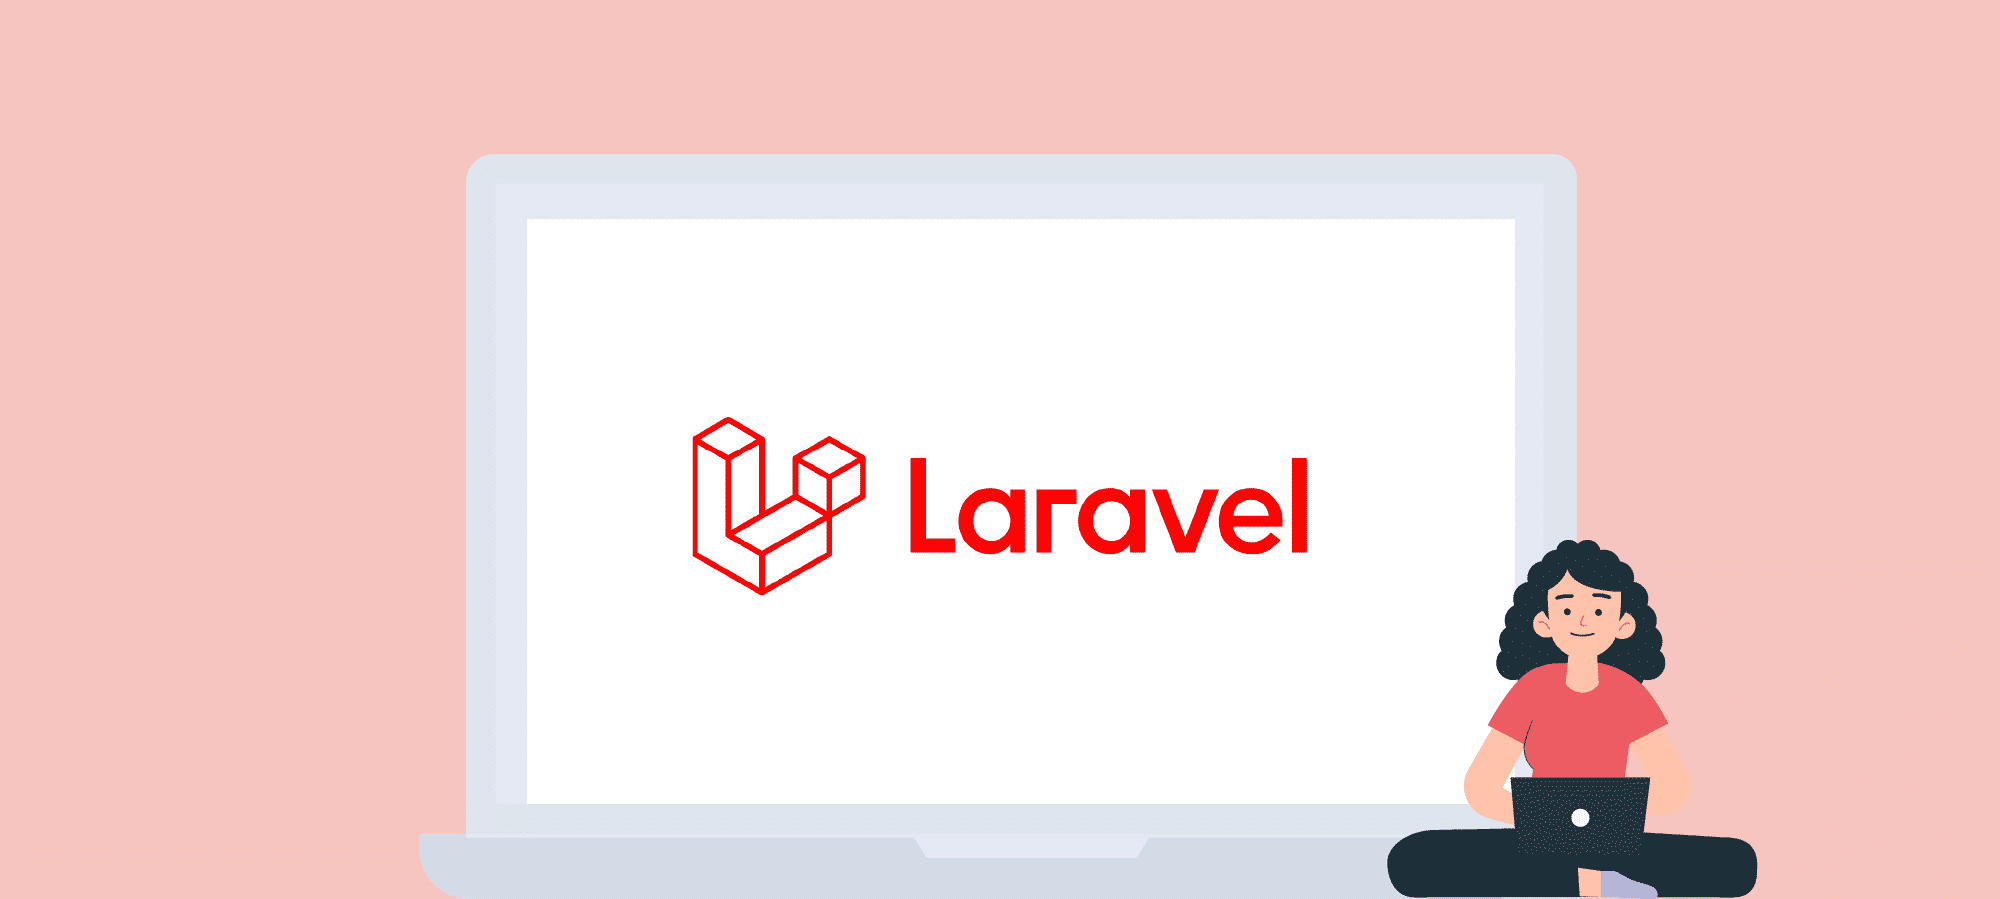 Top 10 Laravel Packages in 2021